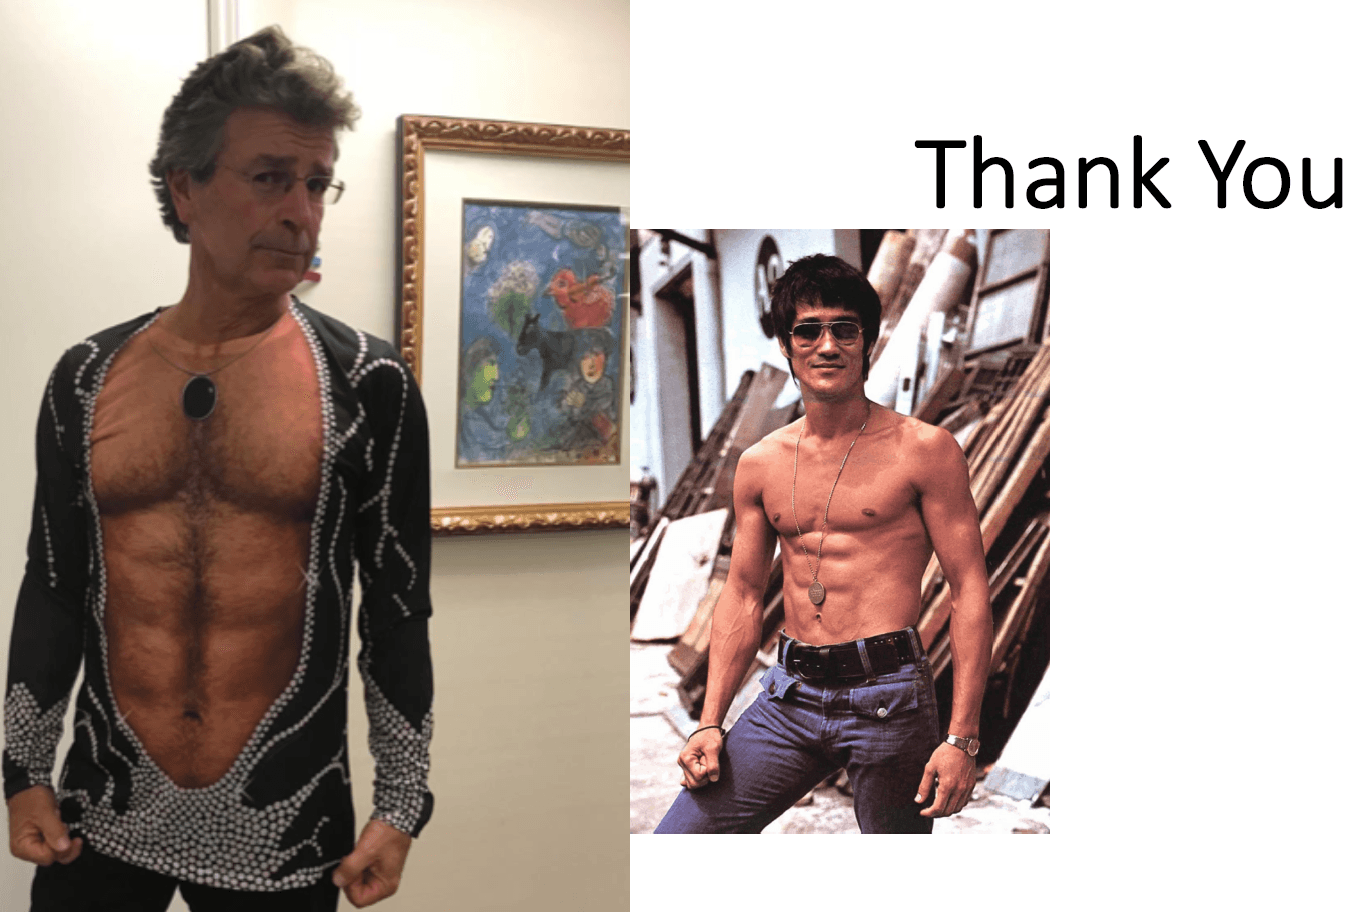 Dr. Persky in a faux muscle shirt next to an image of a shirtless Bruce Lee baring his chiseled abs. 